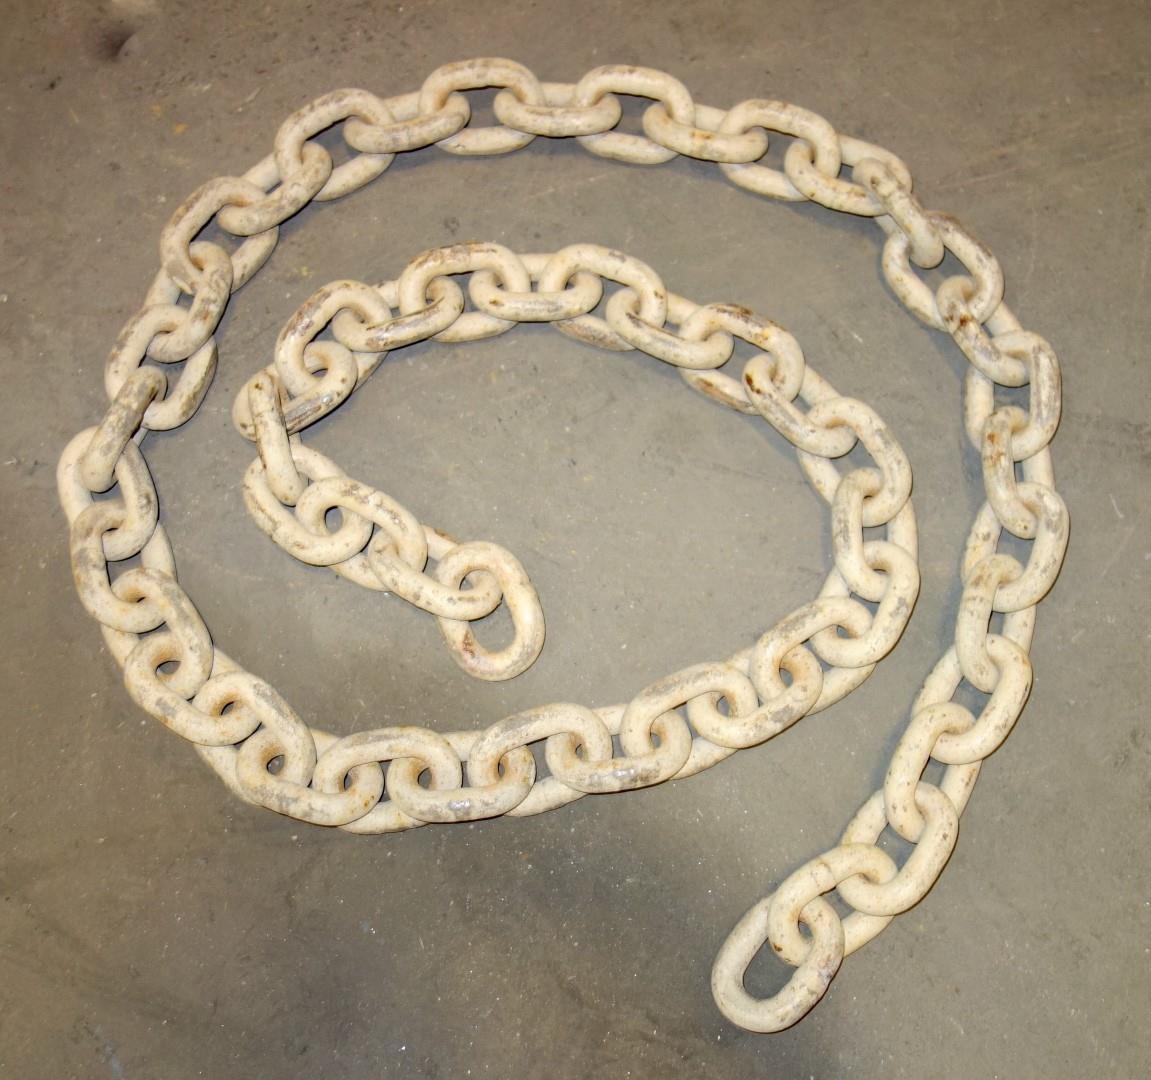 SP-1844 | SP-1844  34 Inch Towing Chain with 55 Links (2).JPG